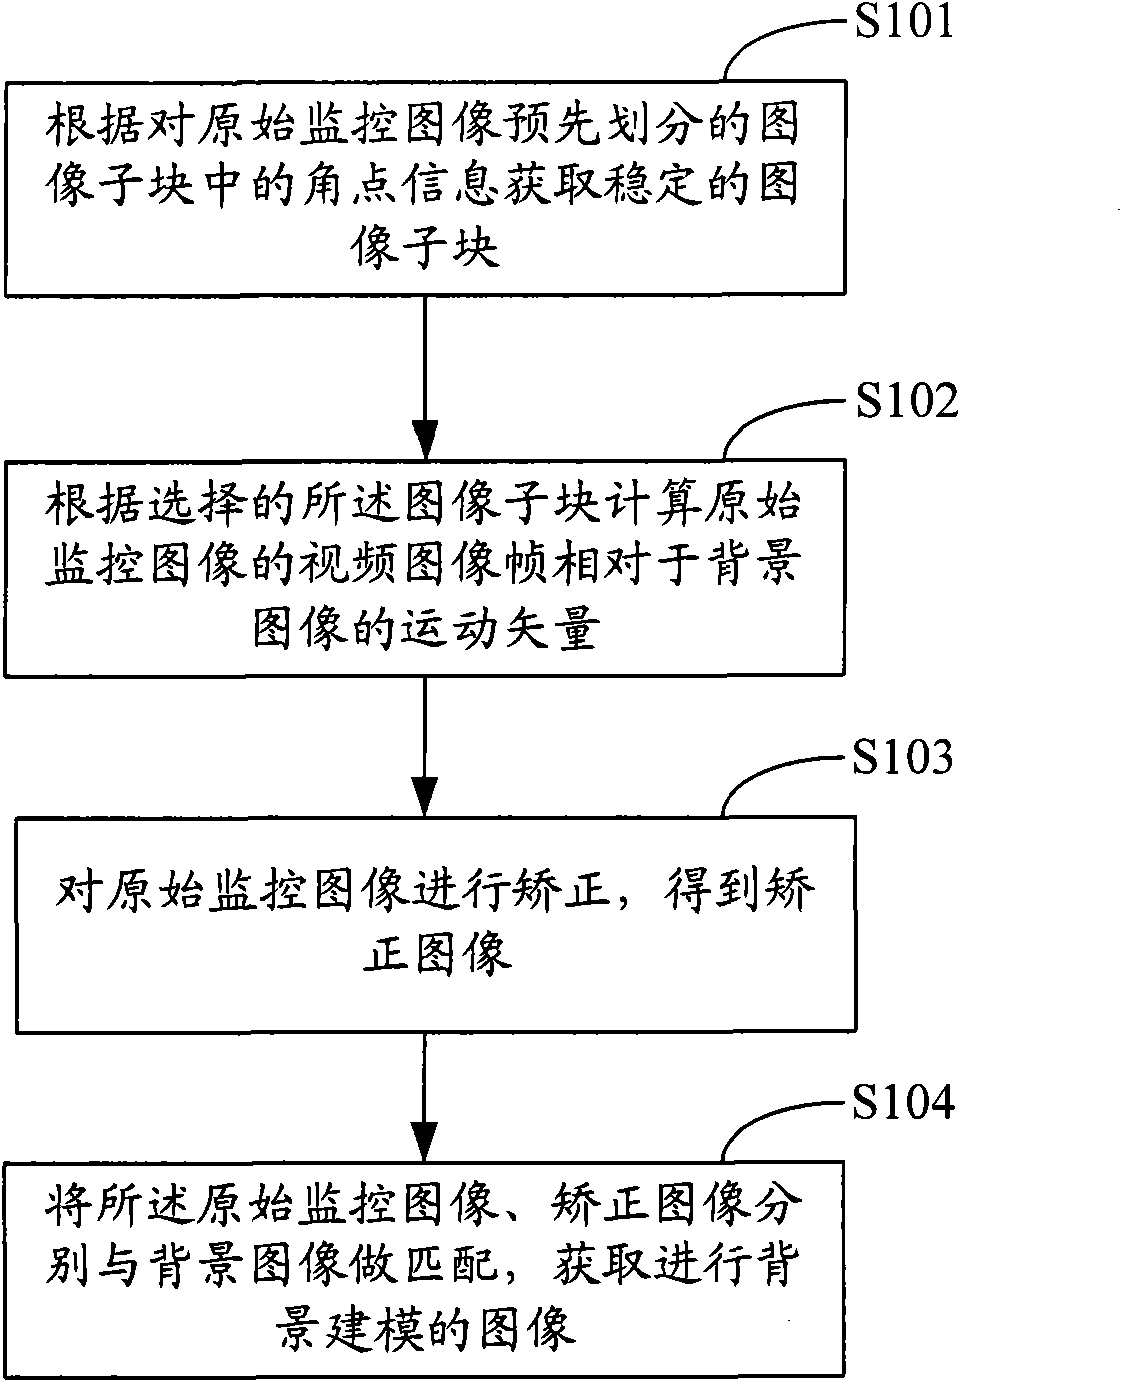 Image stabilizing control method and system for video image and video analytical system